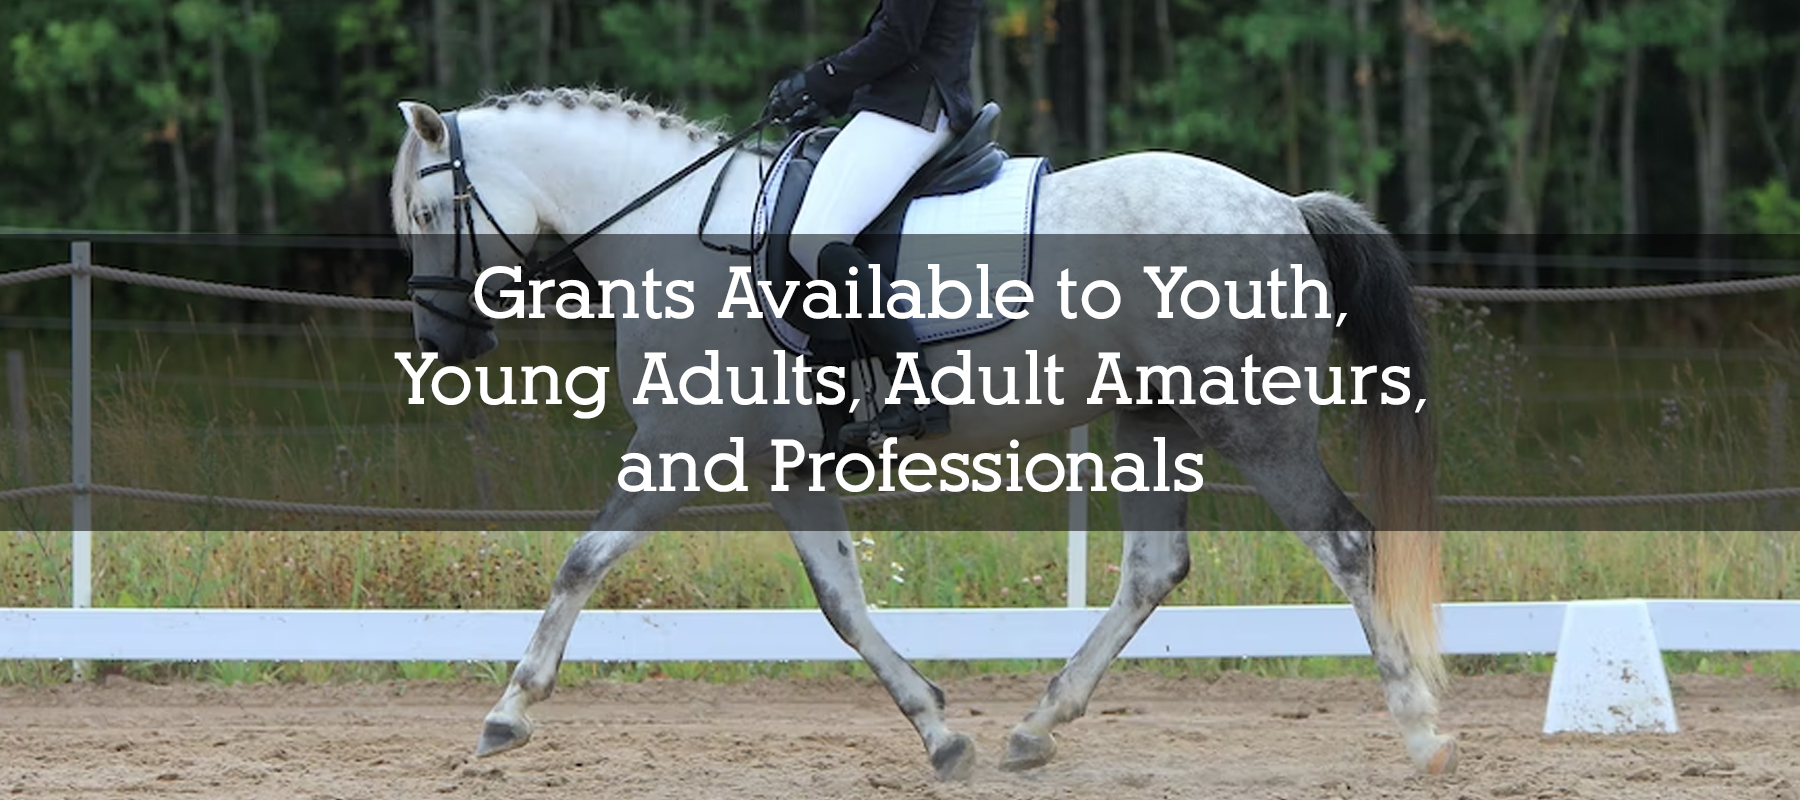 Grants Available to Youth, Young Adults, Adult Amateurs, and Professionals